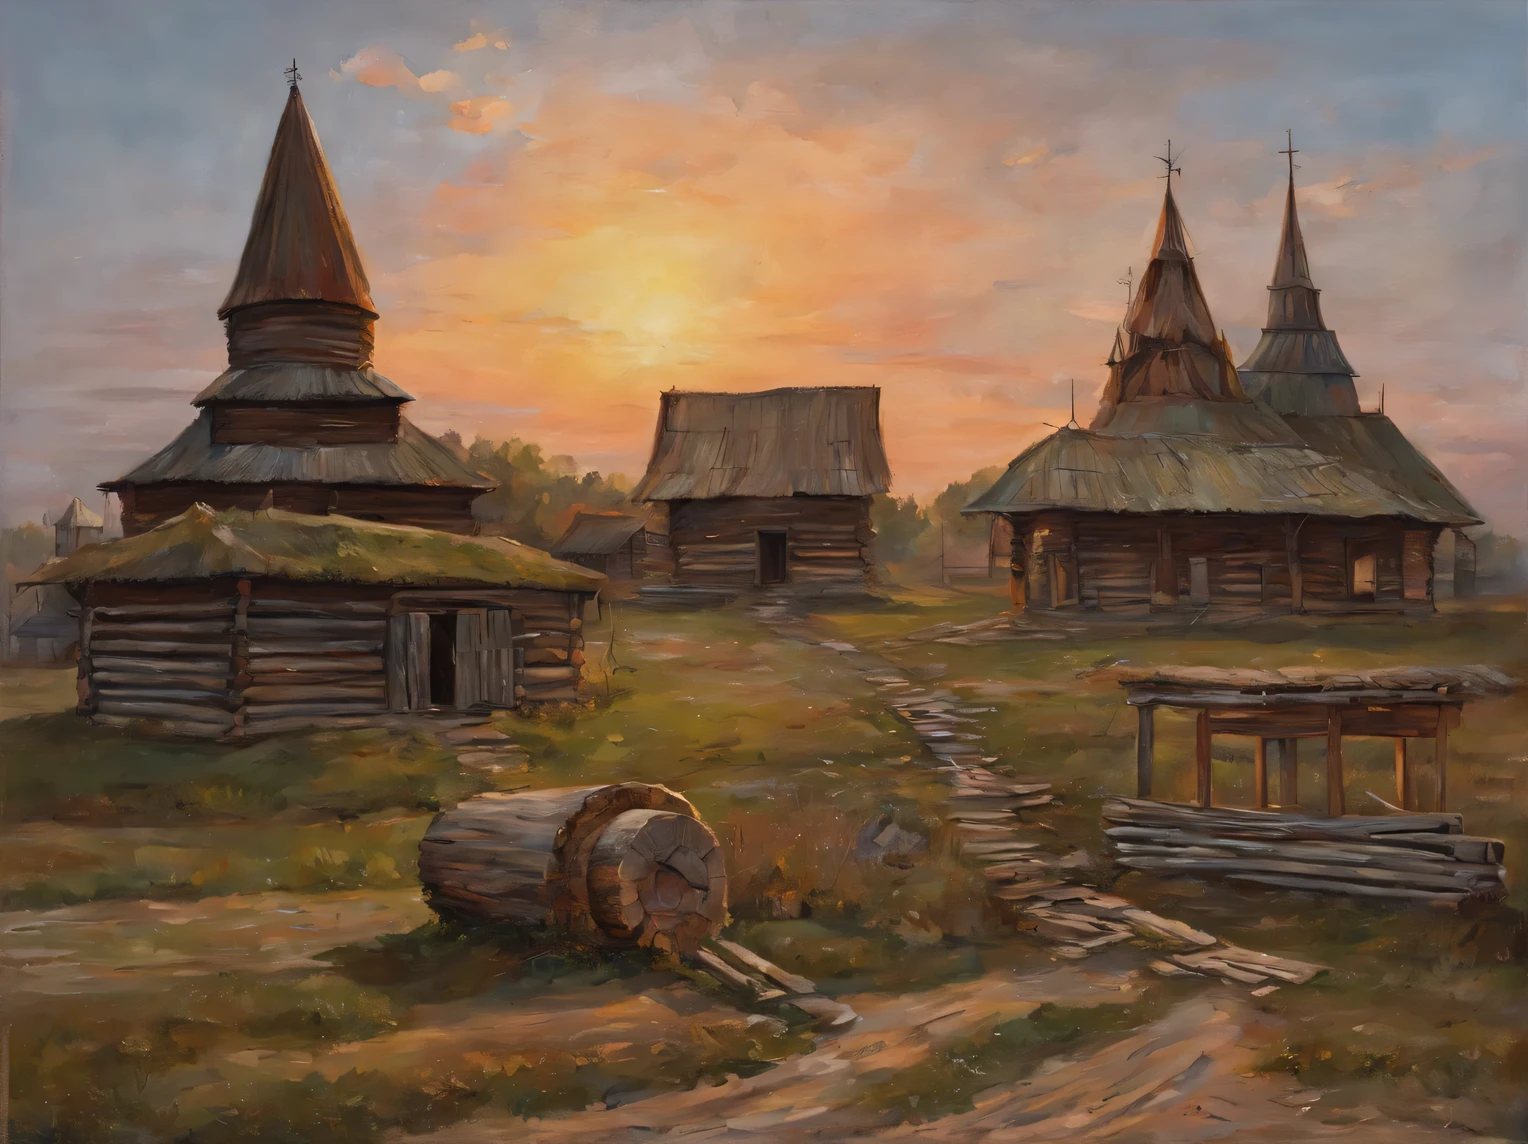 Ancient Russian log city, Slavic culture, Old Slavonic architecture, Ancient city at sunset, Old ancient Slavic city at sunset, oil painting on canvas, a high resolution, high detail